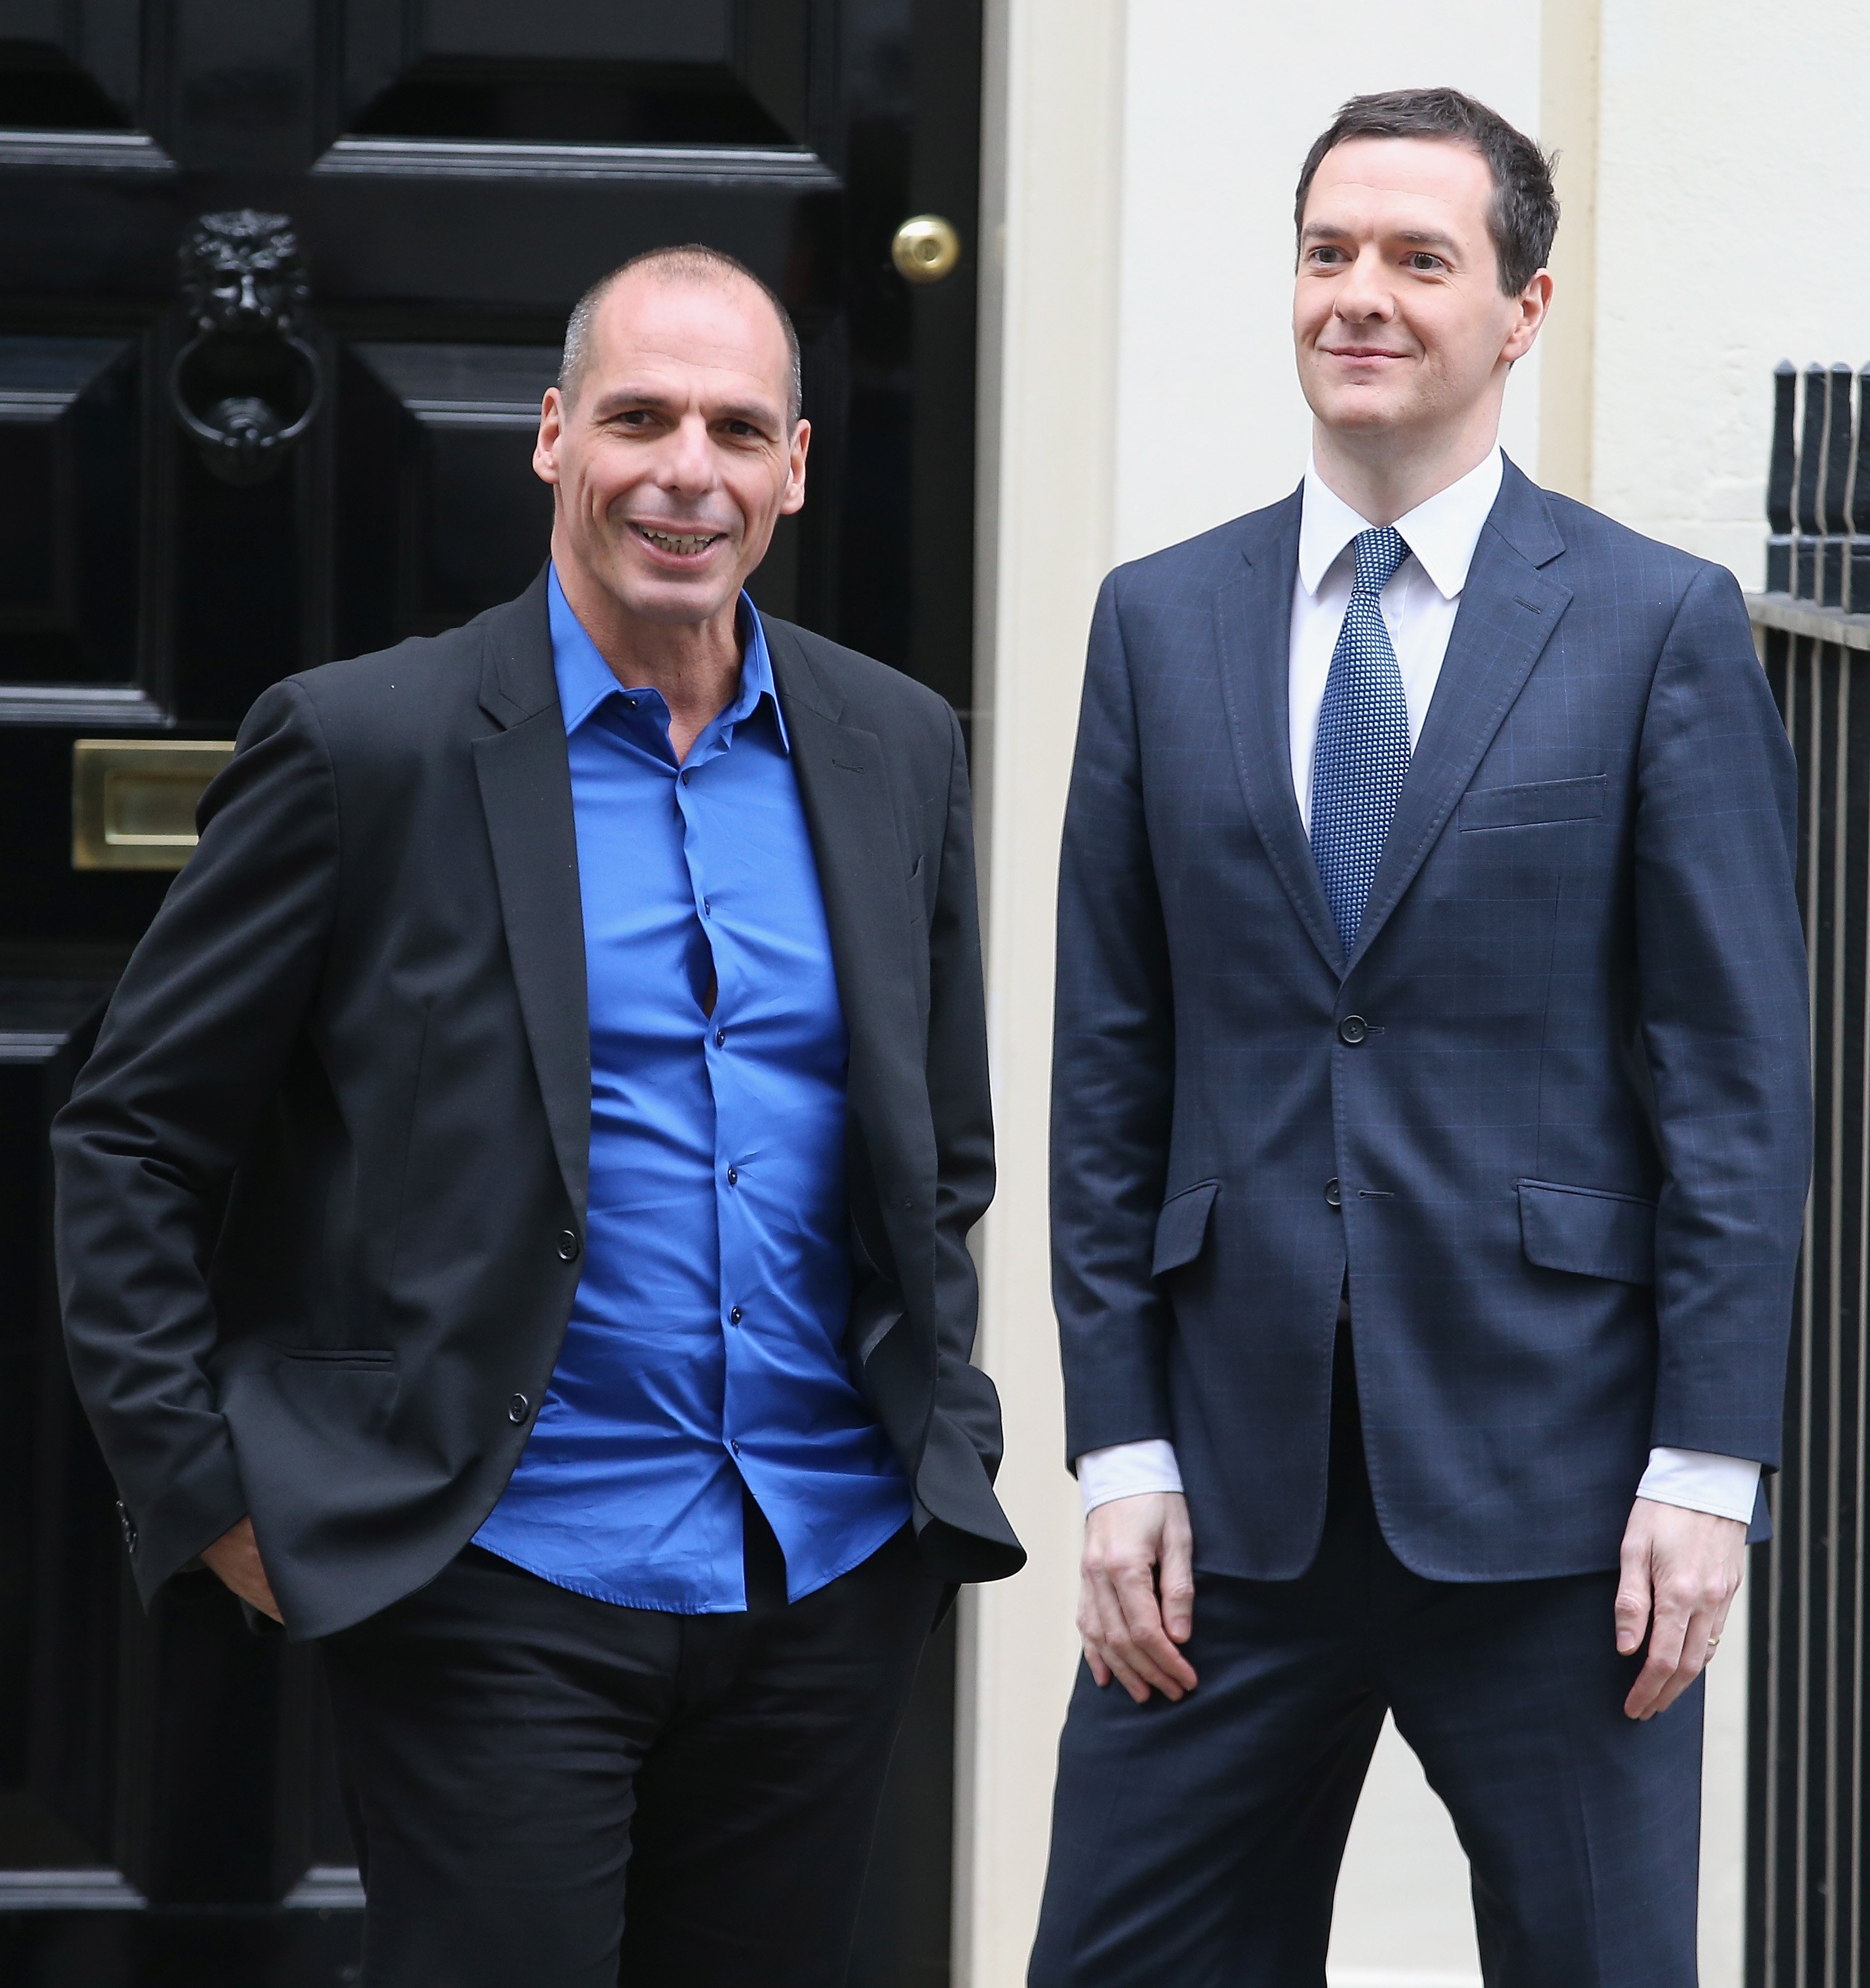 Greece's finance minister Yanis Varoufakis leaves Number 11 Downing Street after meeting Chancellor of the Exchequer George Osborne on Feb. 2, 2015 in London.